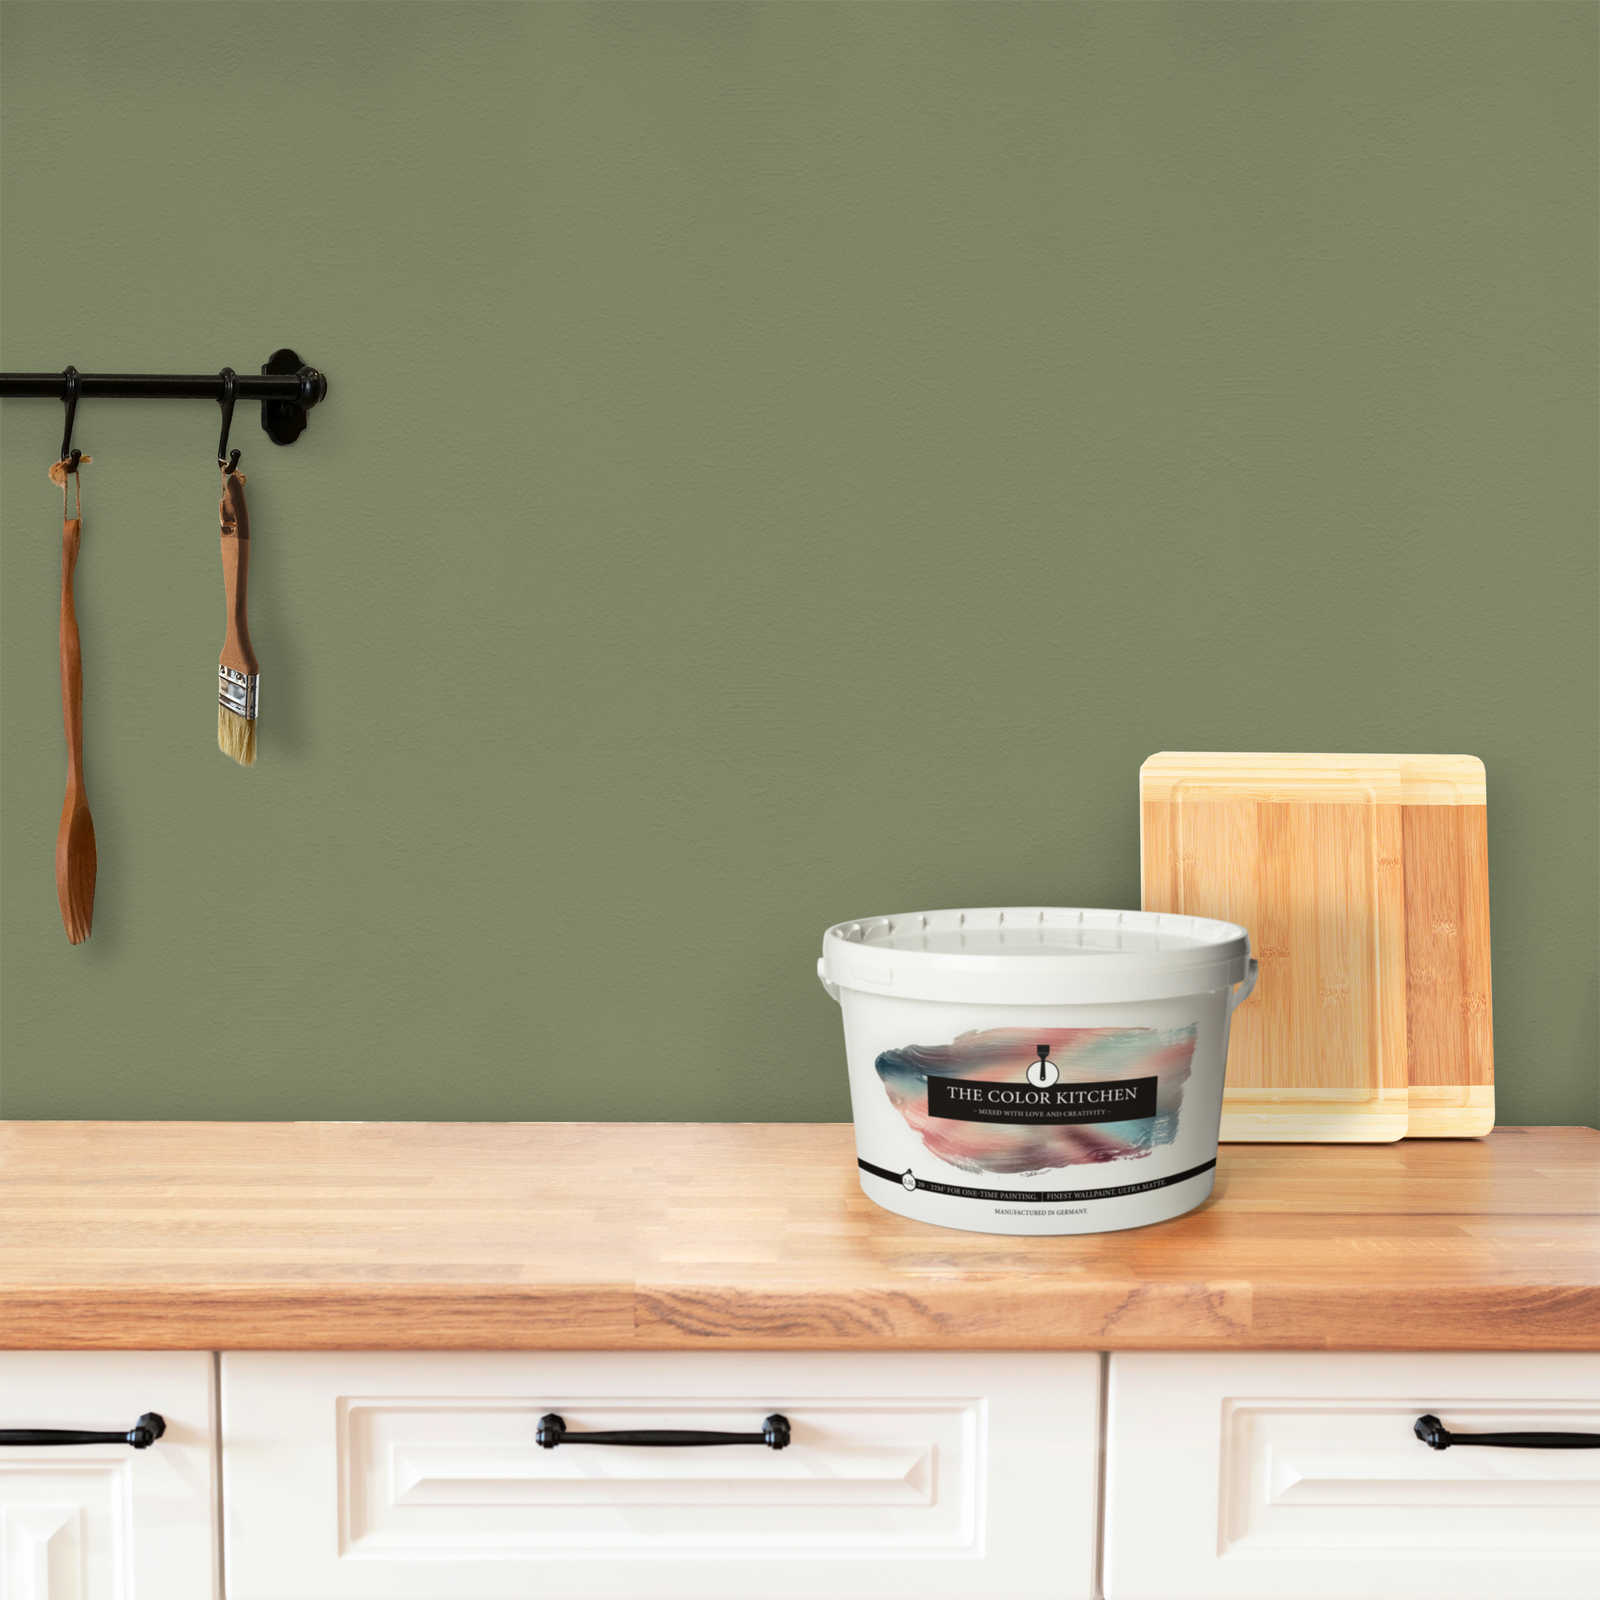             Wall Paint TCK4002 »Balmy Basil« in homely green – 2.5 litre
        